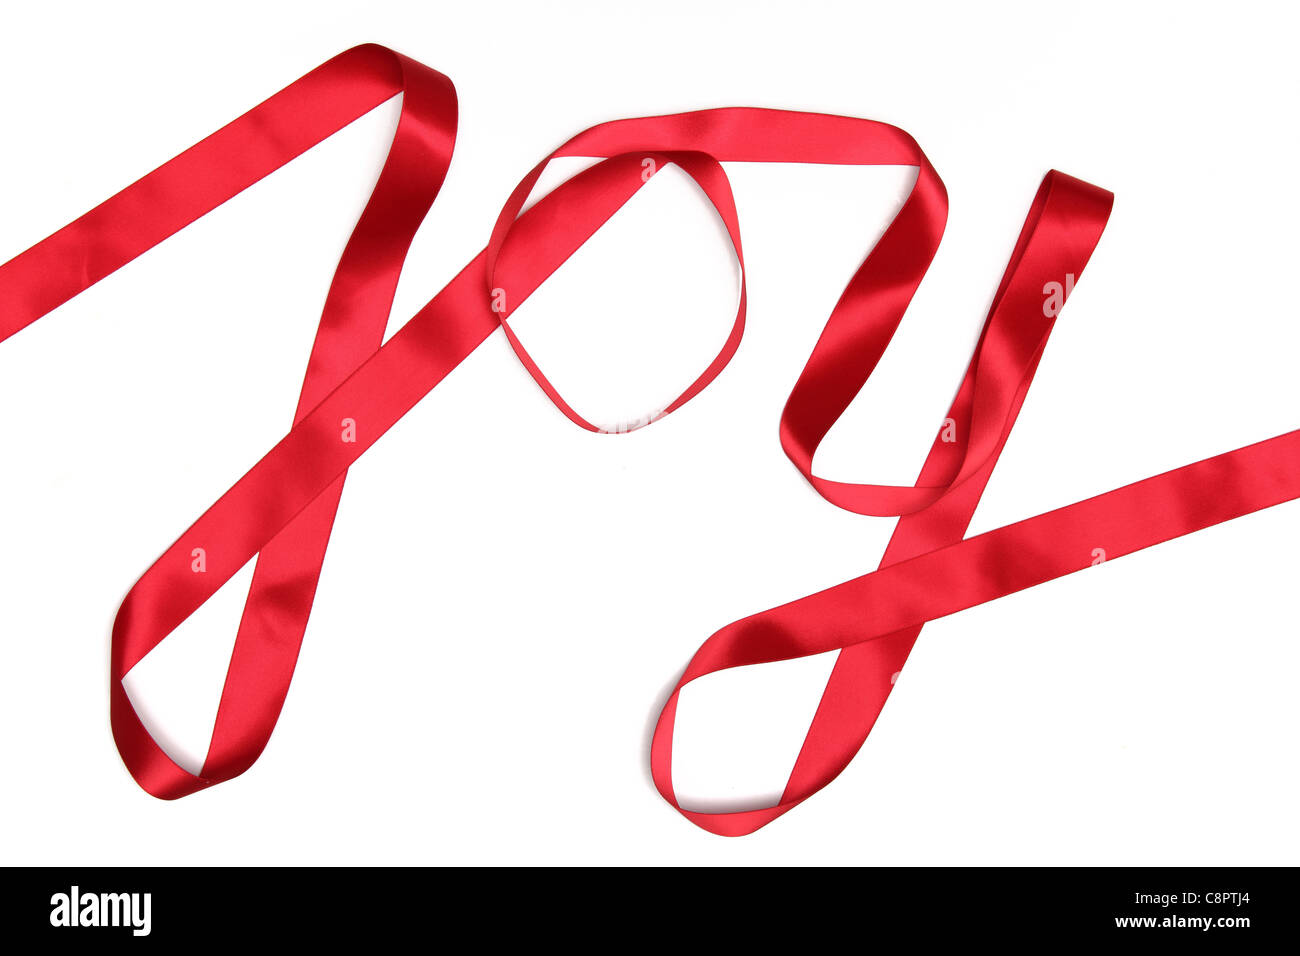 Joy word written in red ribbon on white background Stock Photo